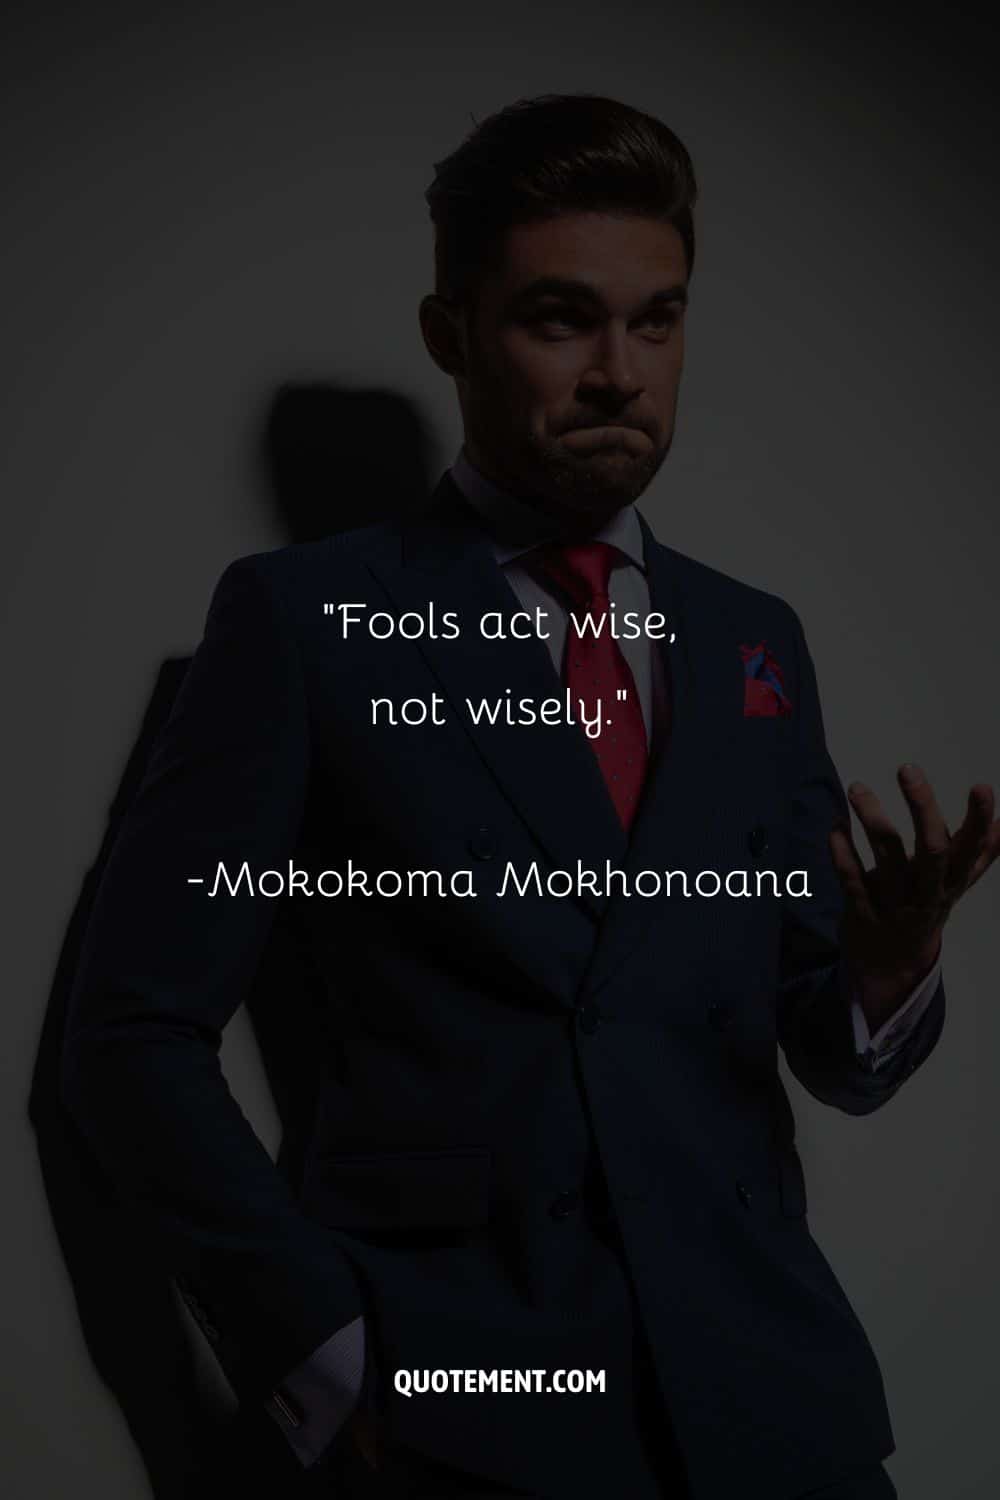 “Fools act wise, not wisely.”